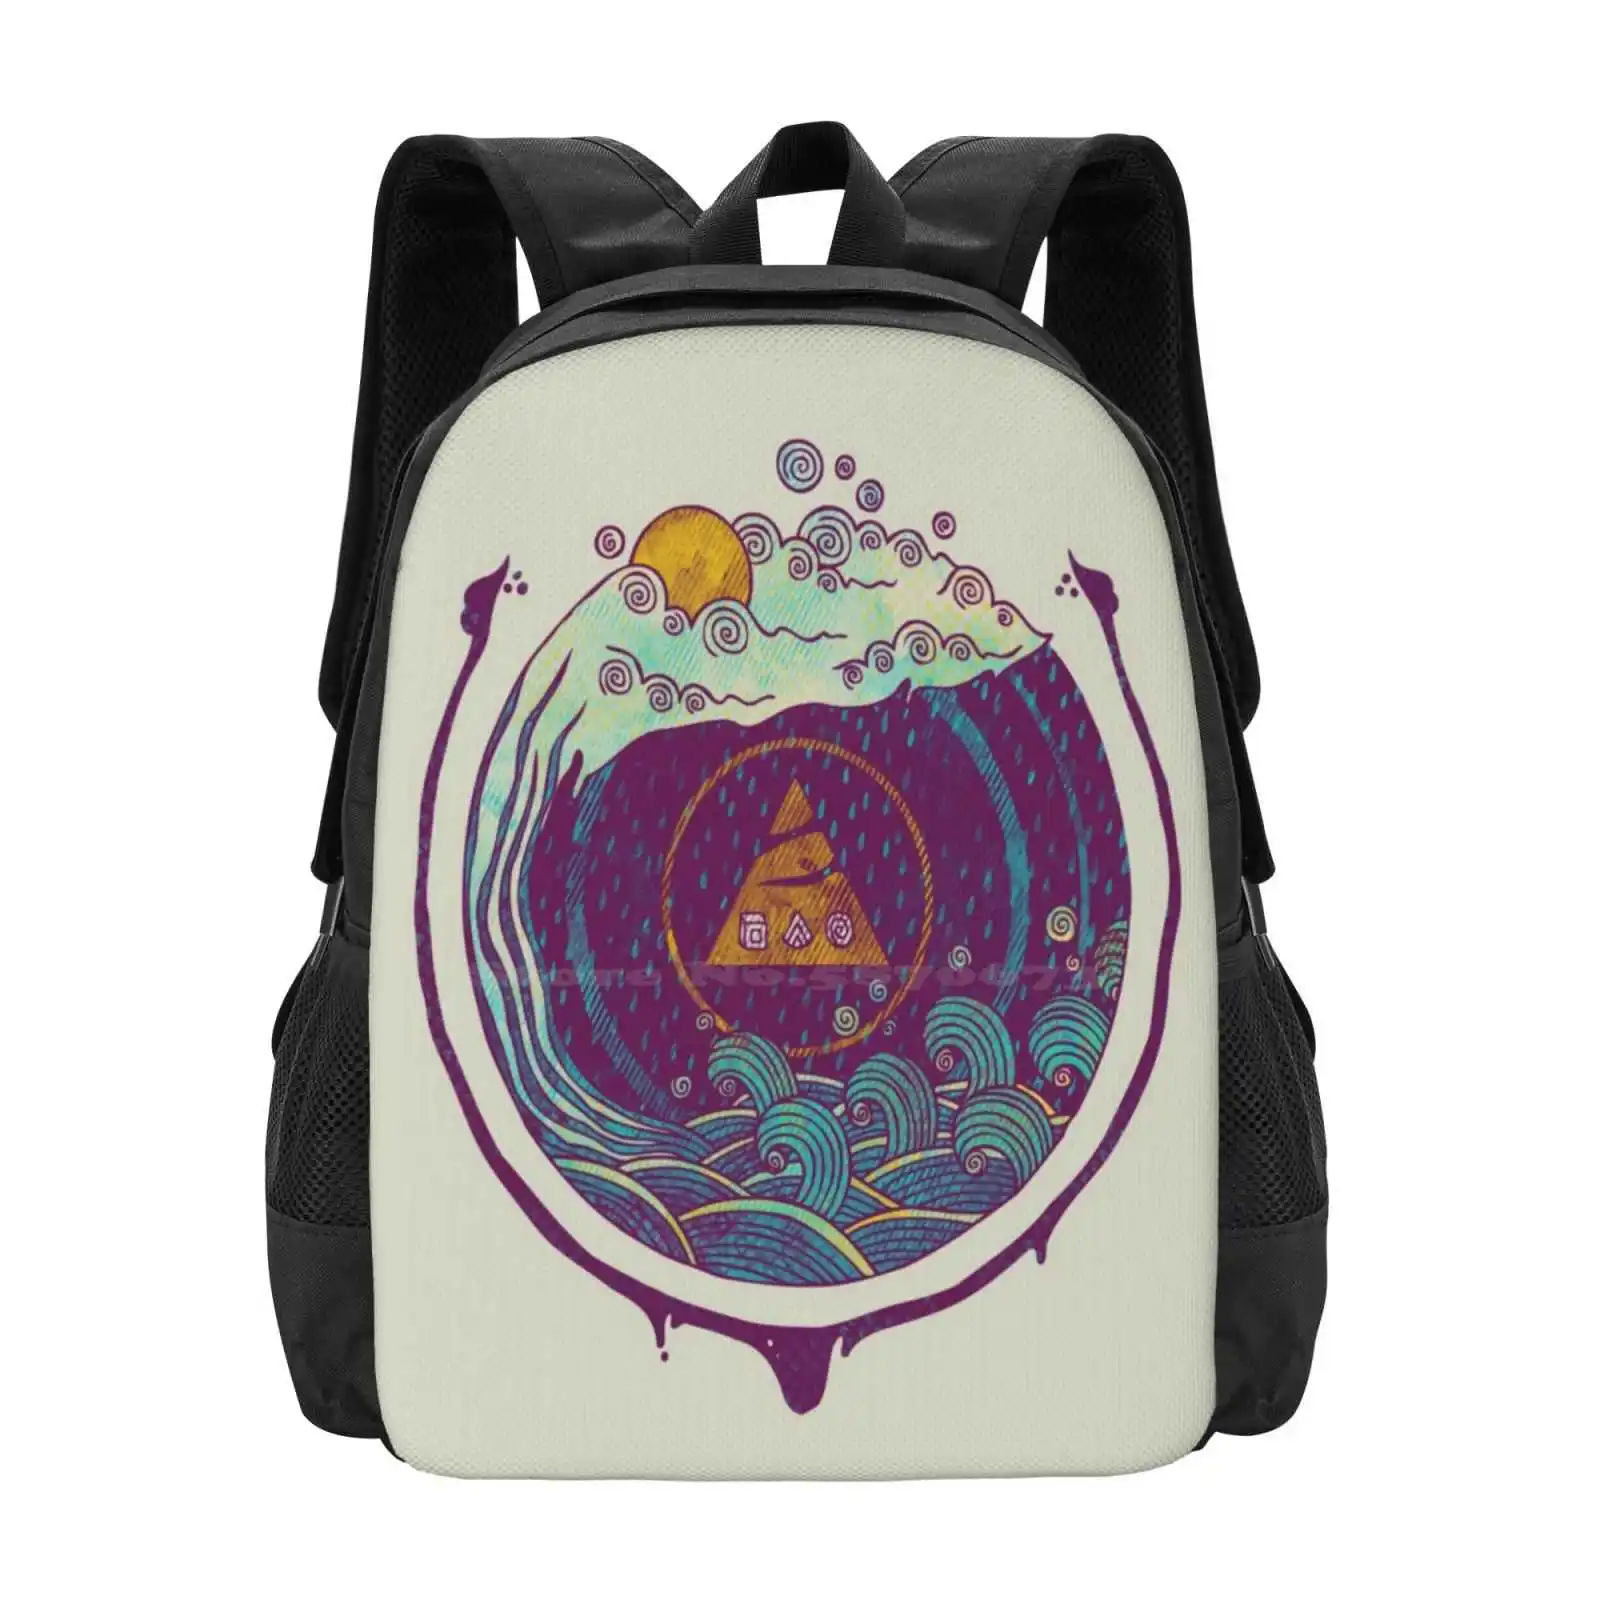 

Water Pattern Design Bagpack School Bags Waves Liquid Cloud Precipitation Geometry Concentric Abstract Cycle Triangle Sun Rainy